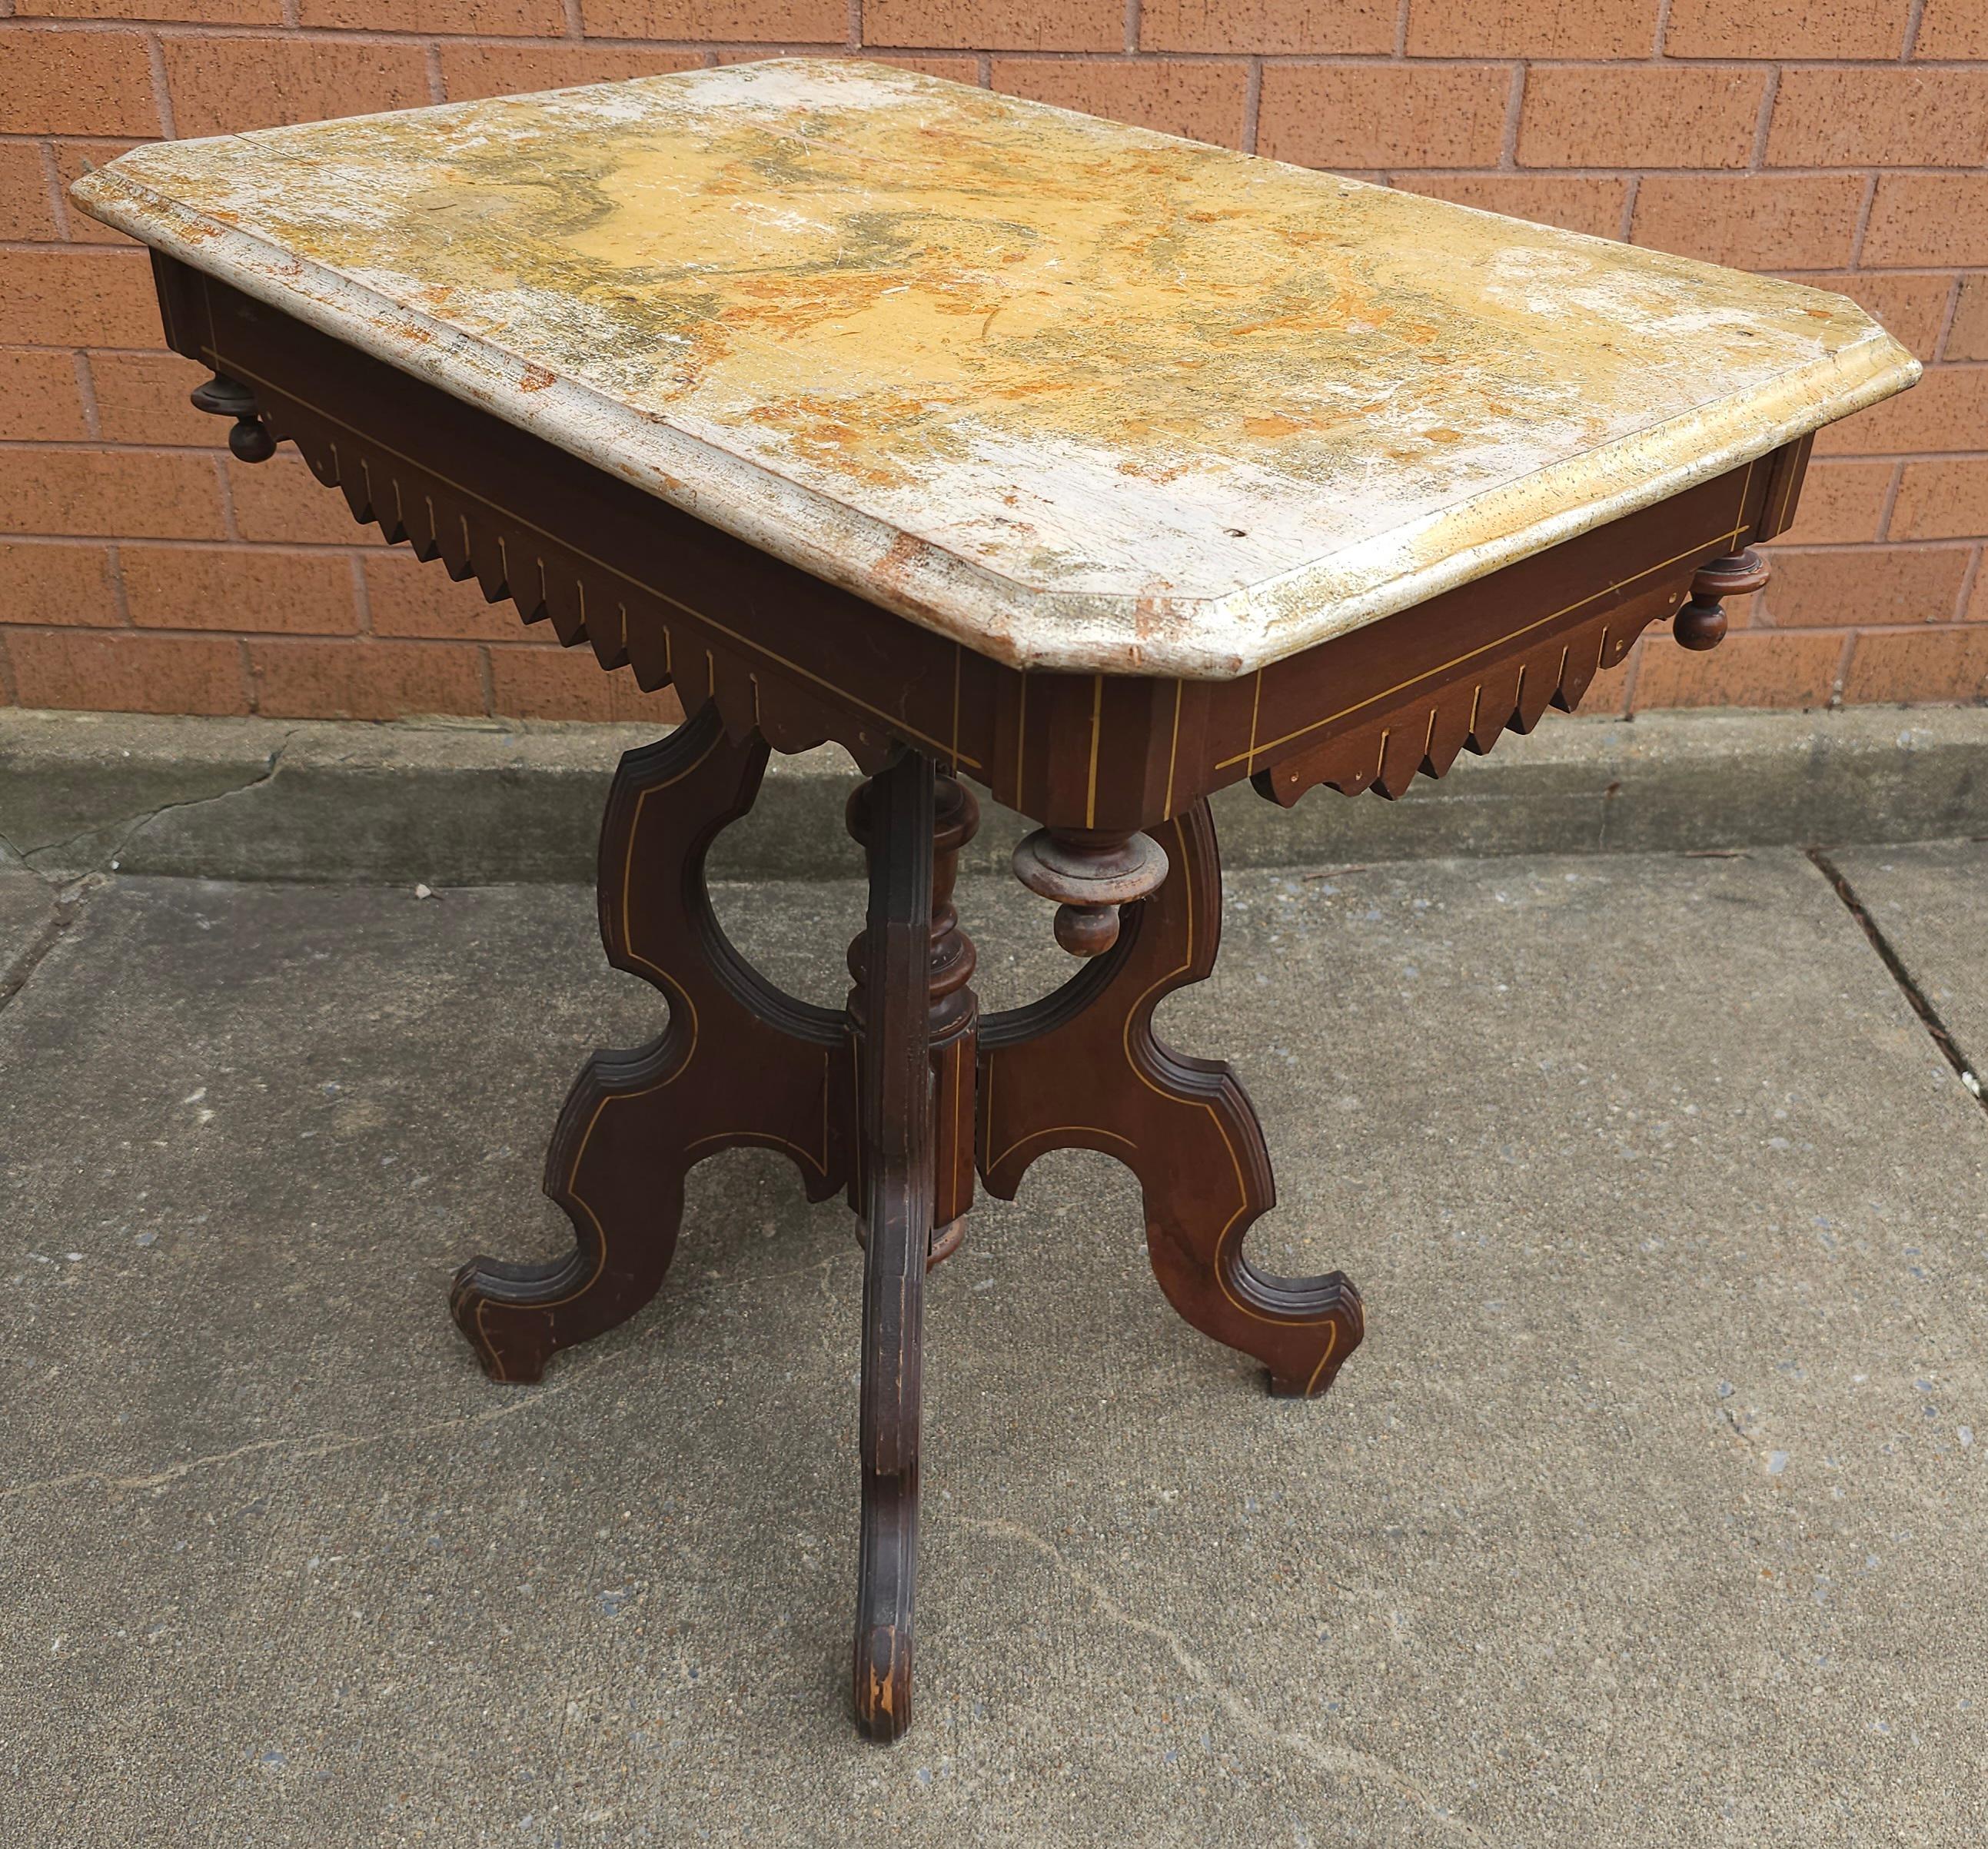 A Victorian Renaissance Style Walnut washed out Painted Side Table. Measures 29